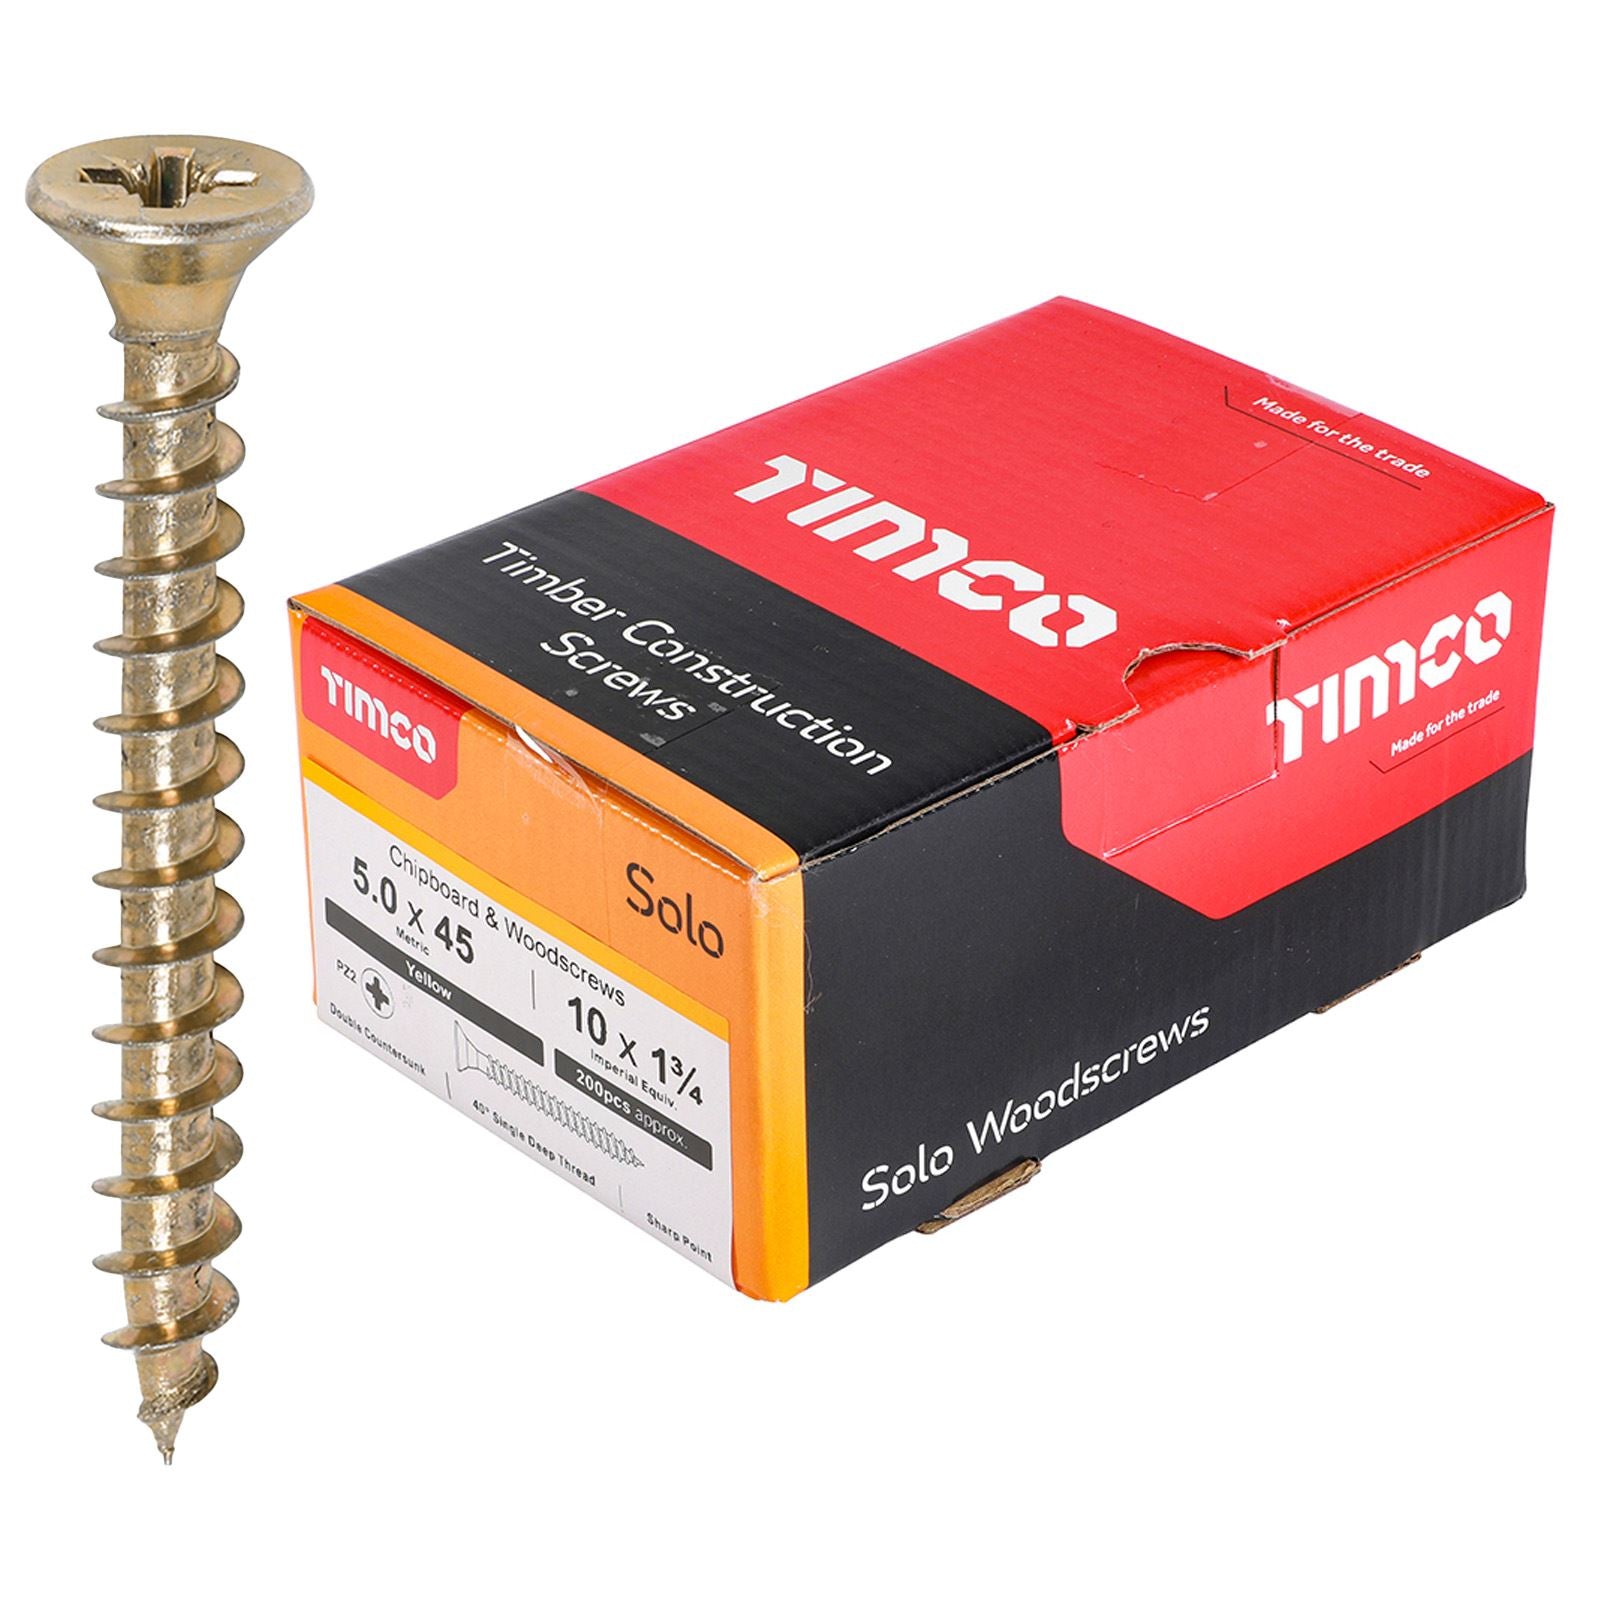 TIMCO SOLO Wood Screws Yellow Double Countersunk Pozi Boxed - Choose Size